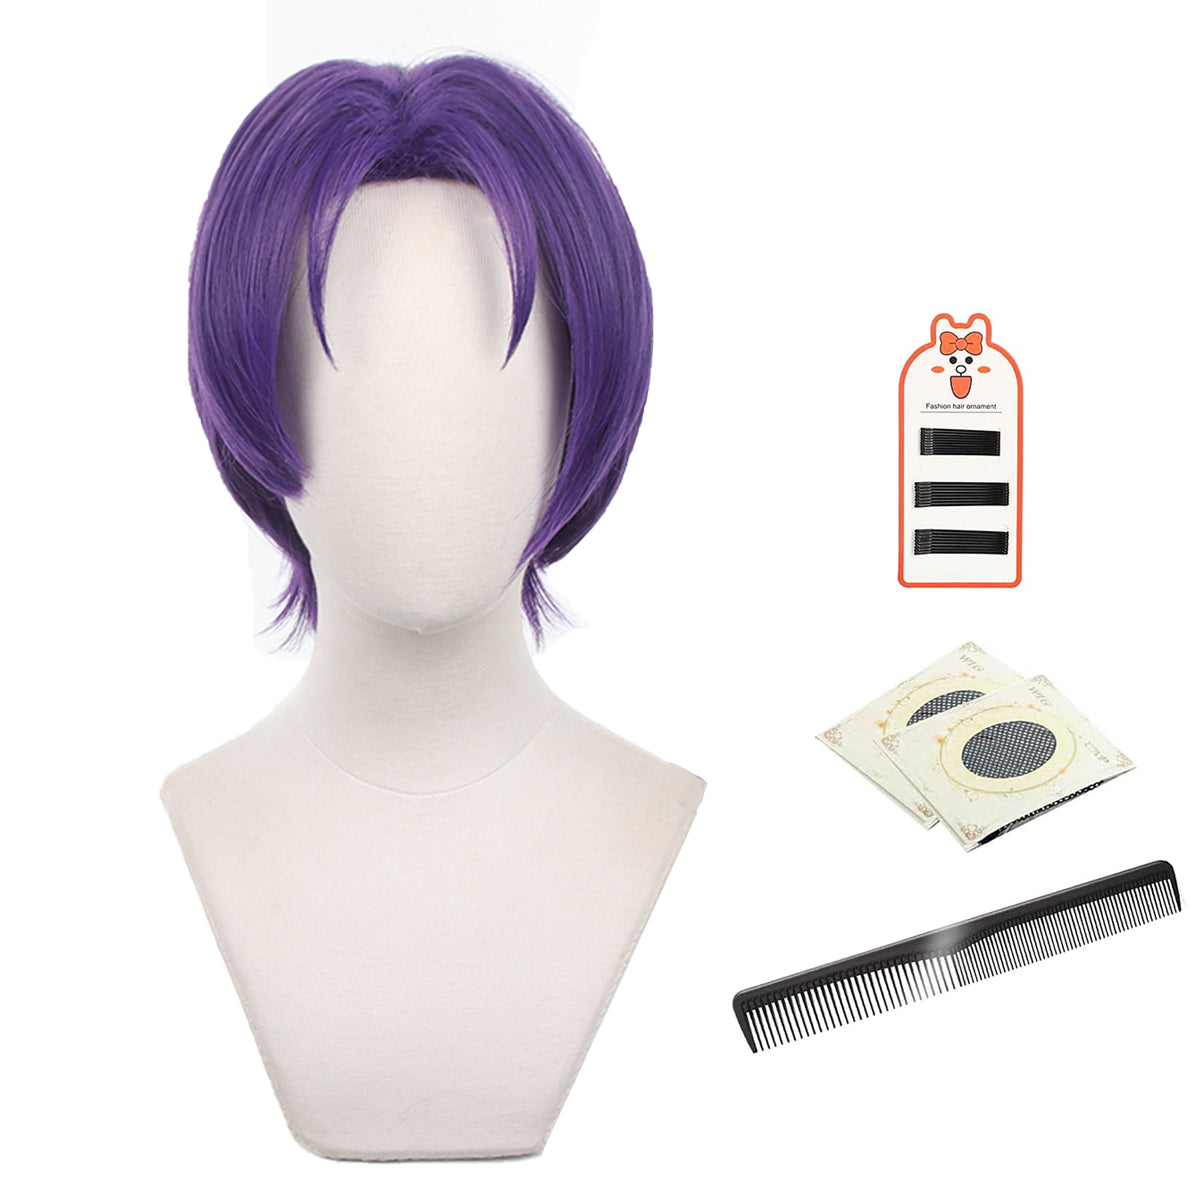 HOLOUN Blue Lock Anime Reo Mikage Cosplay Costume Wig Casual Daily Wearing Sweater Pants Outfit Rose Net Sythetic Fiber Gift